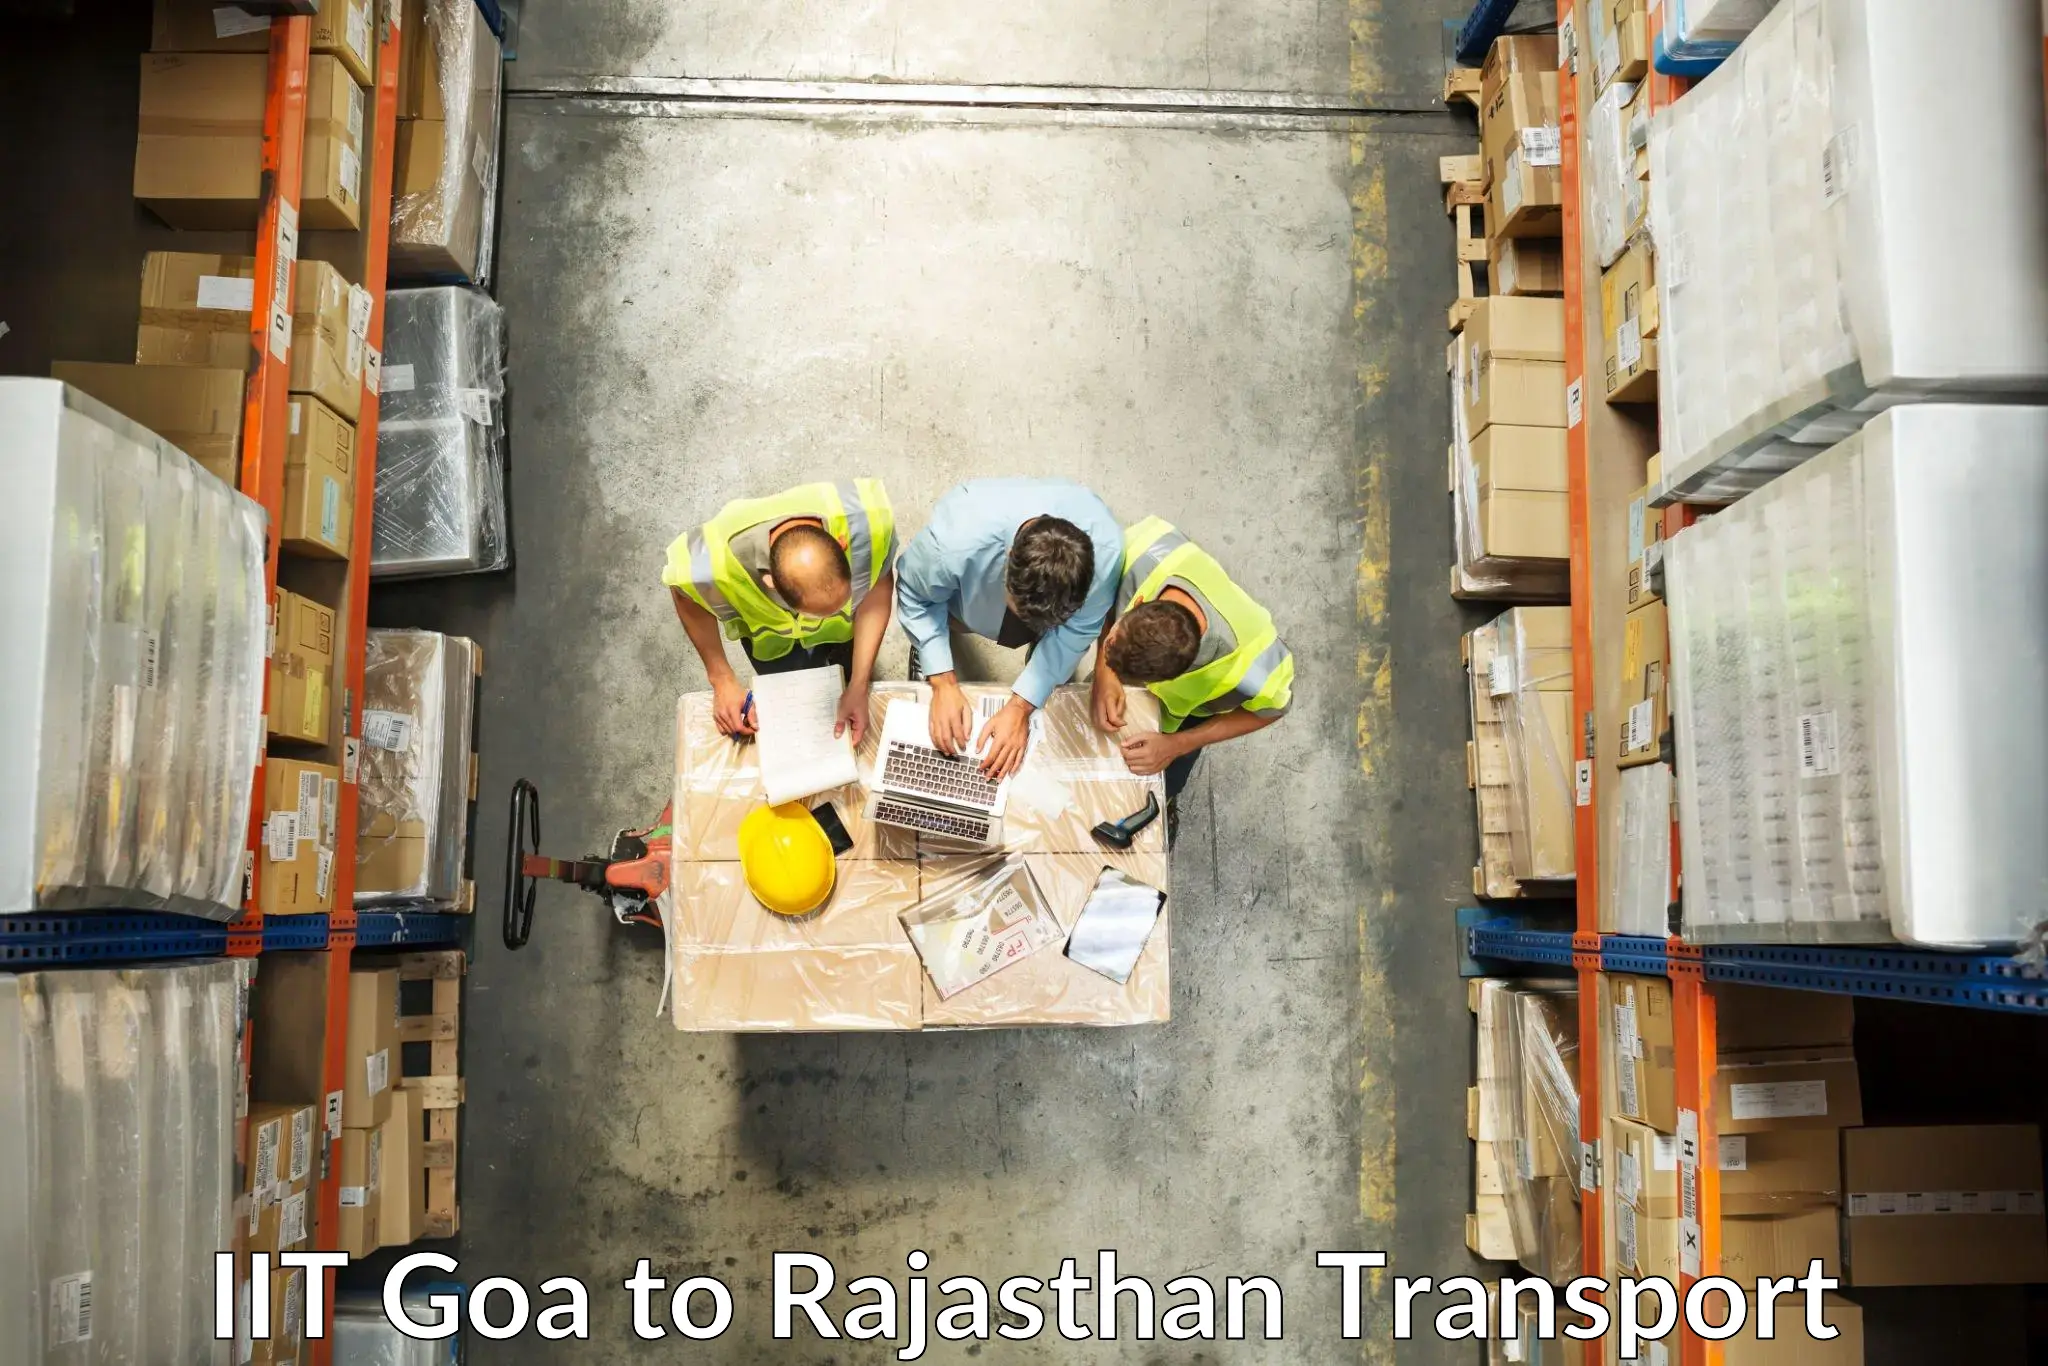 Daily parcel service transport IIT Goa to Ajmer